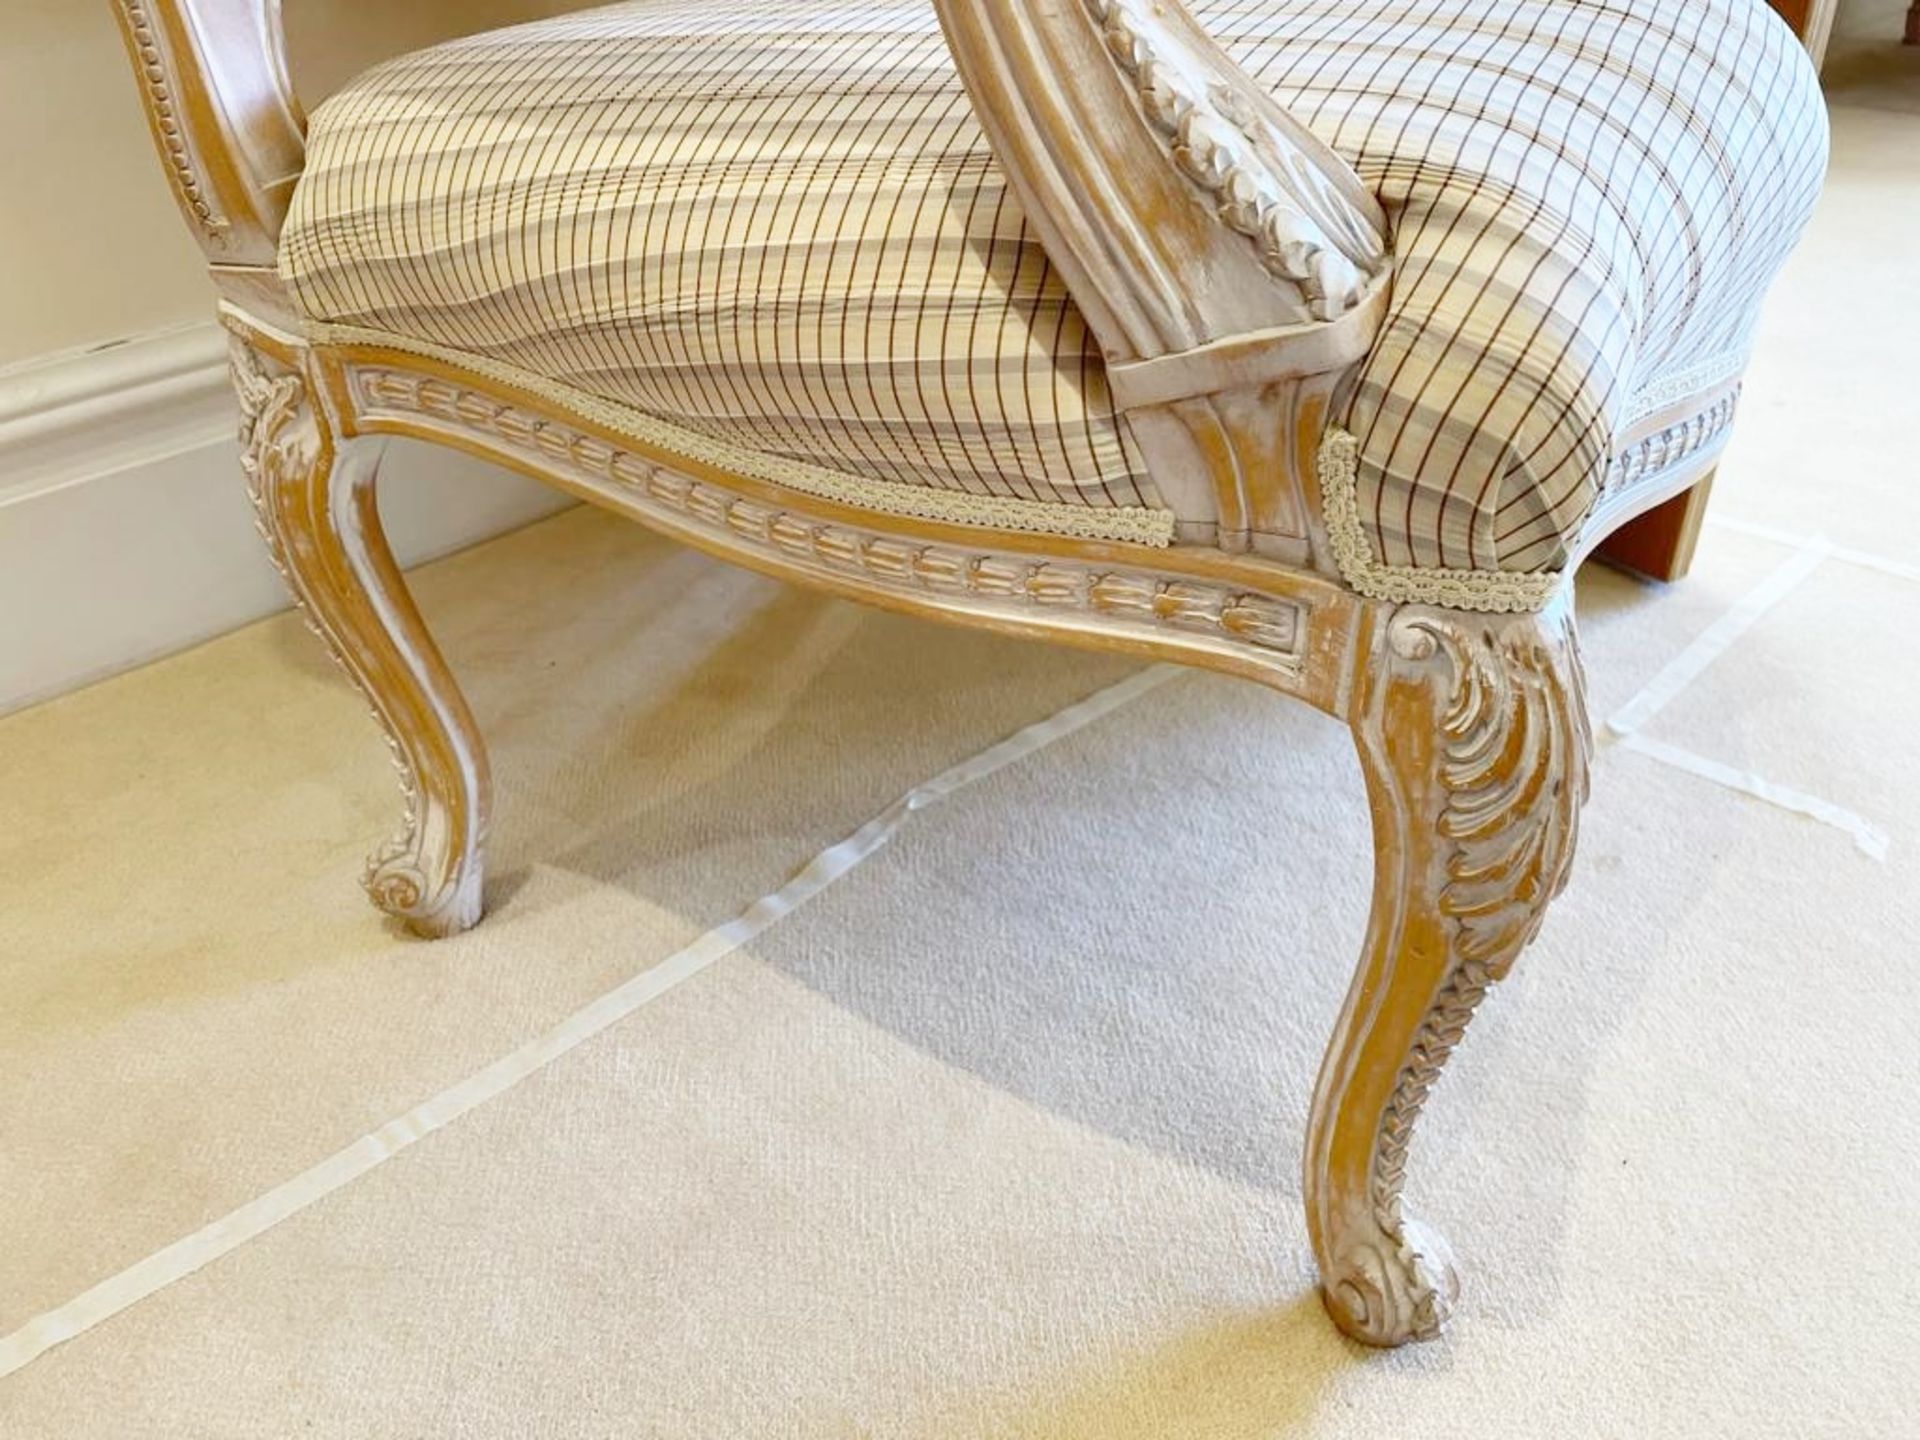 Pair of French Shabby Chic Bedroom Chairs - Stunning Carved Wood Chair Upholstered With Striped - Image 14 of 16